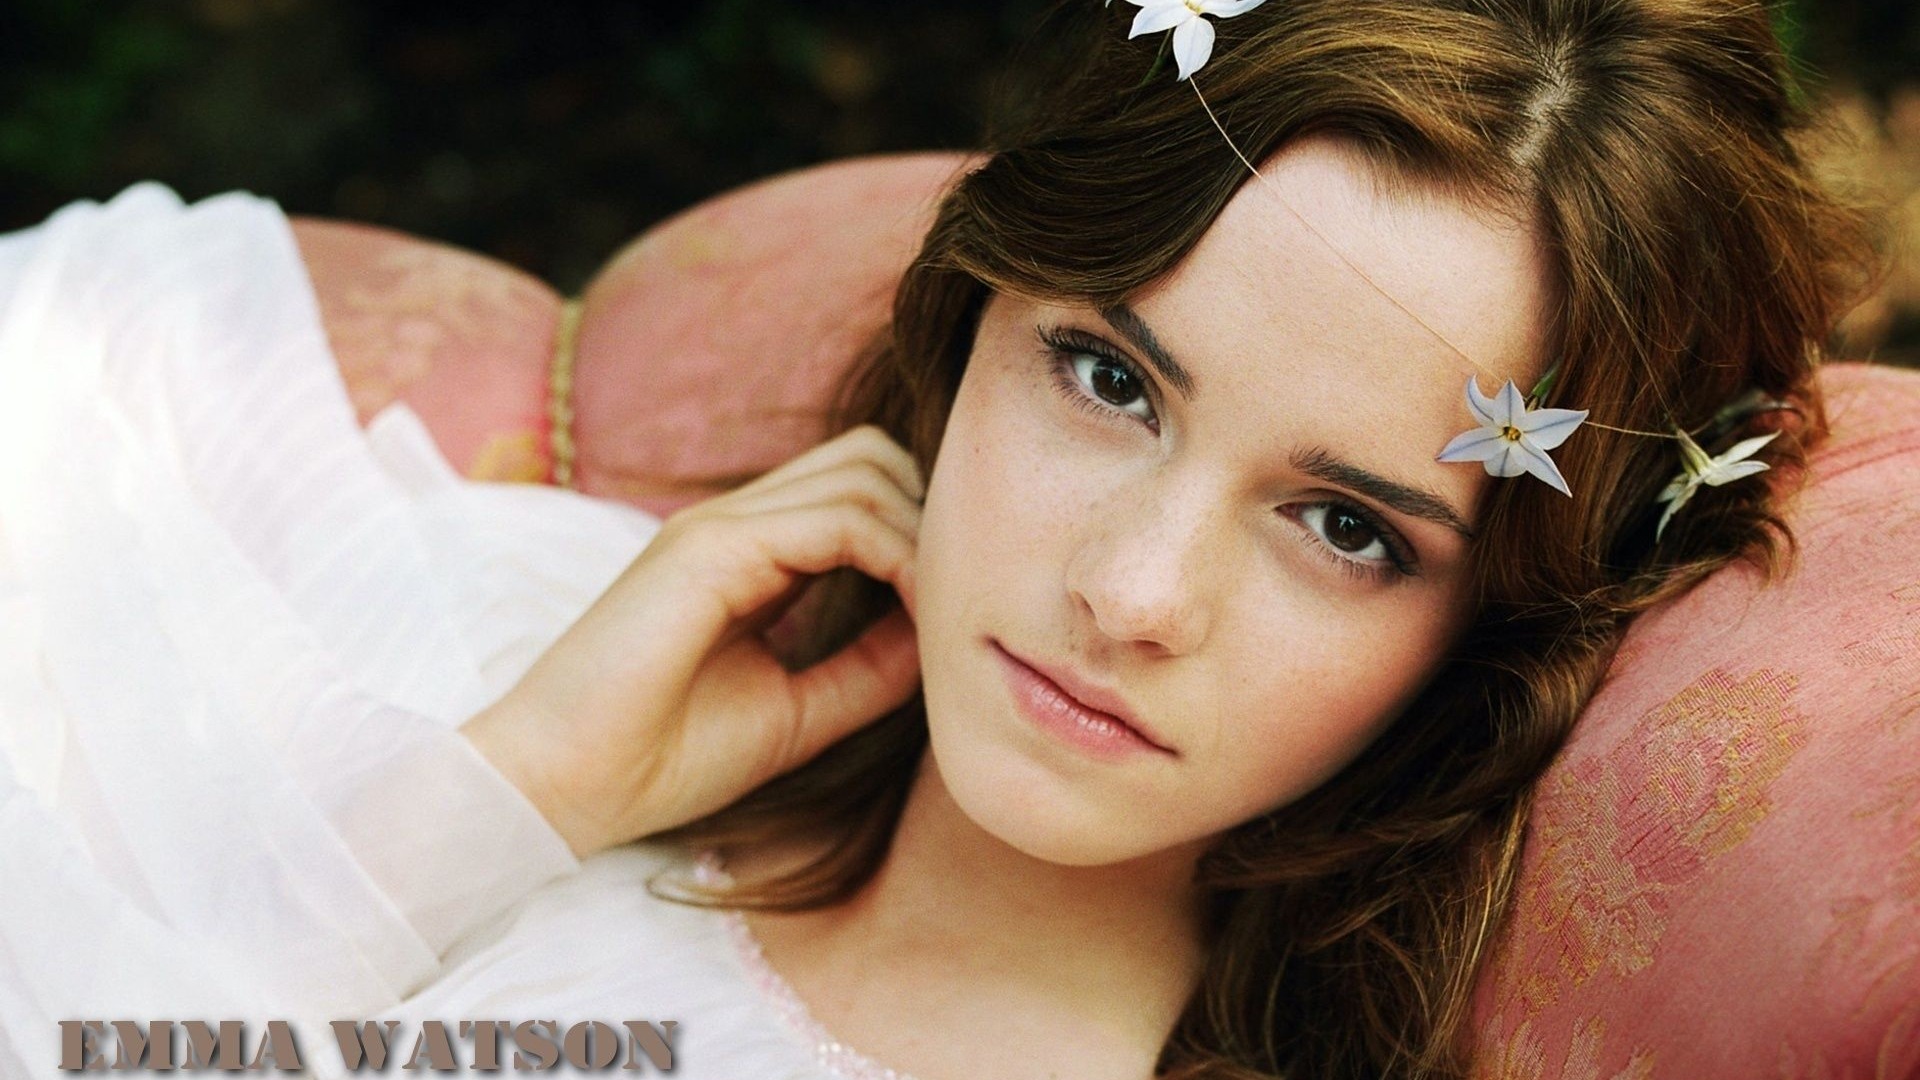 Emma Watson #027 - 1920x1080 Wallpapers Pictures Photos Images